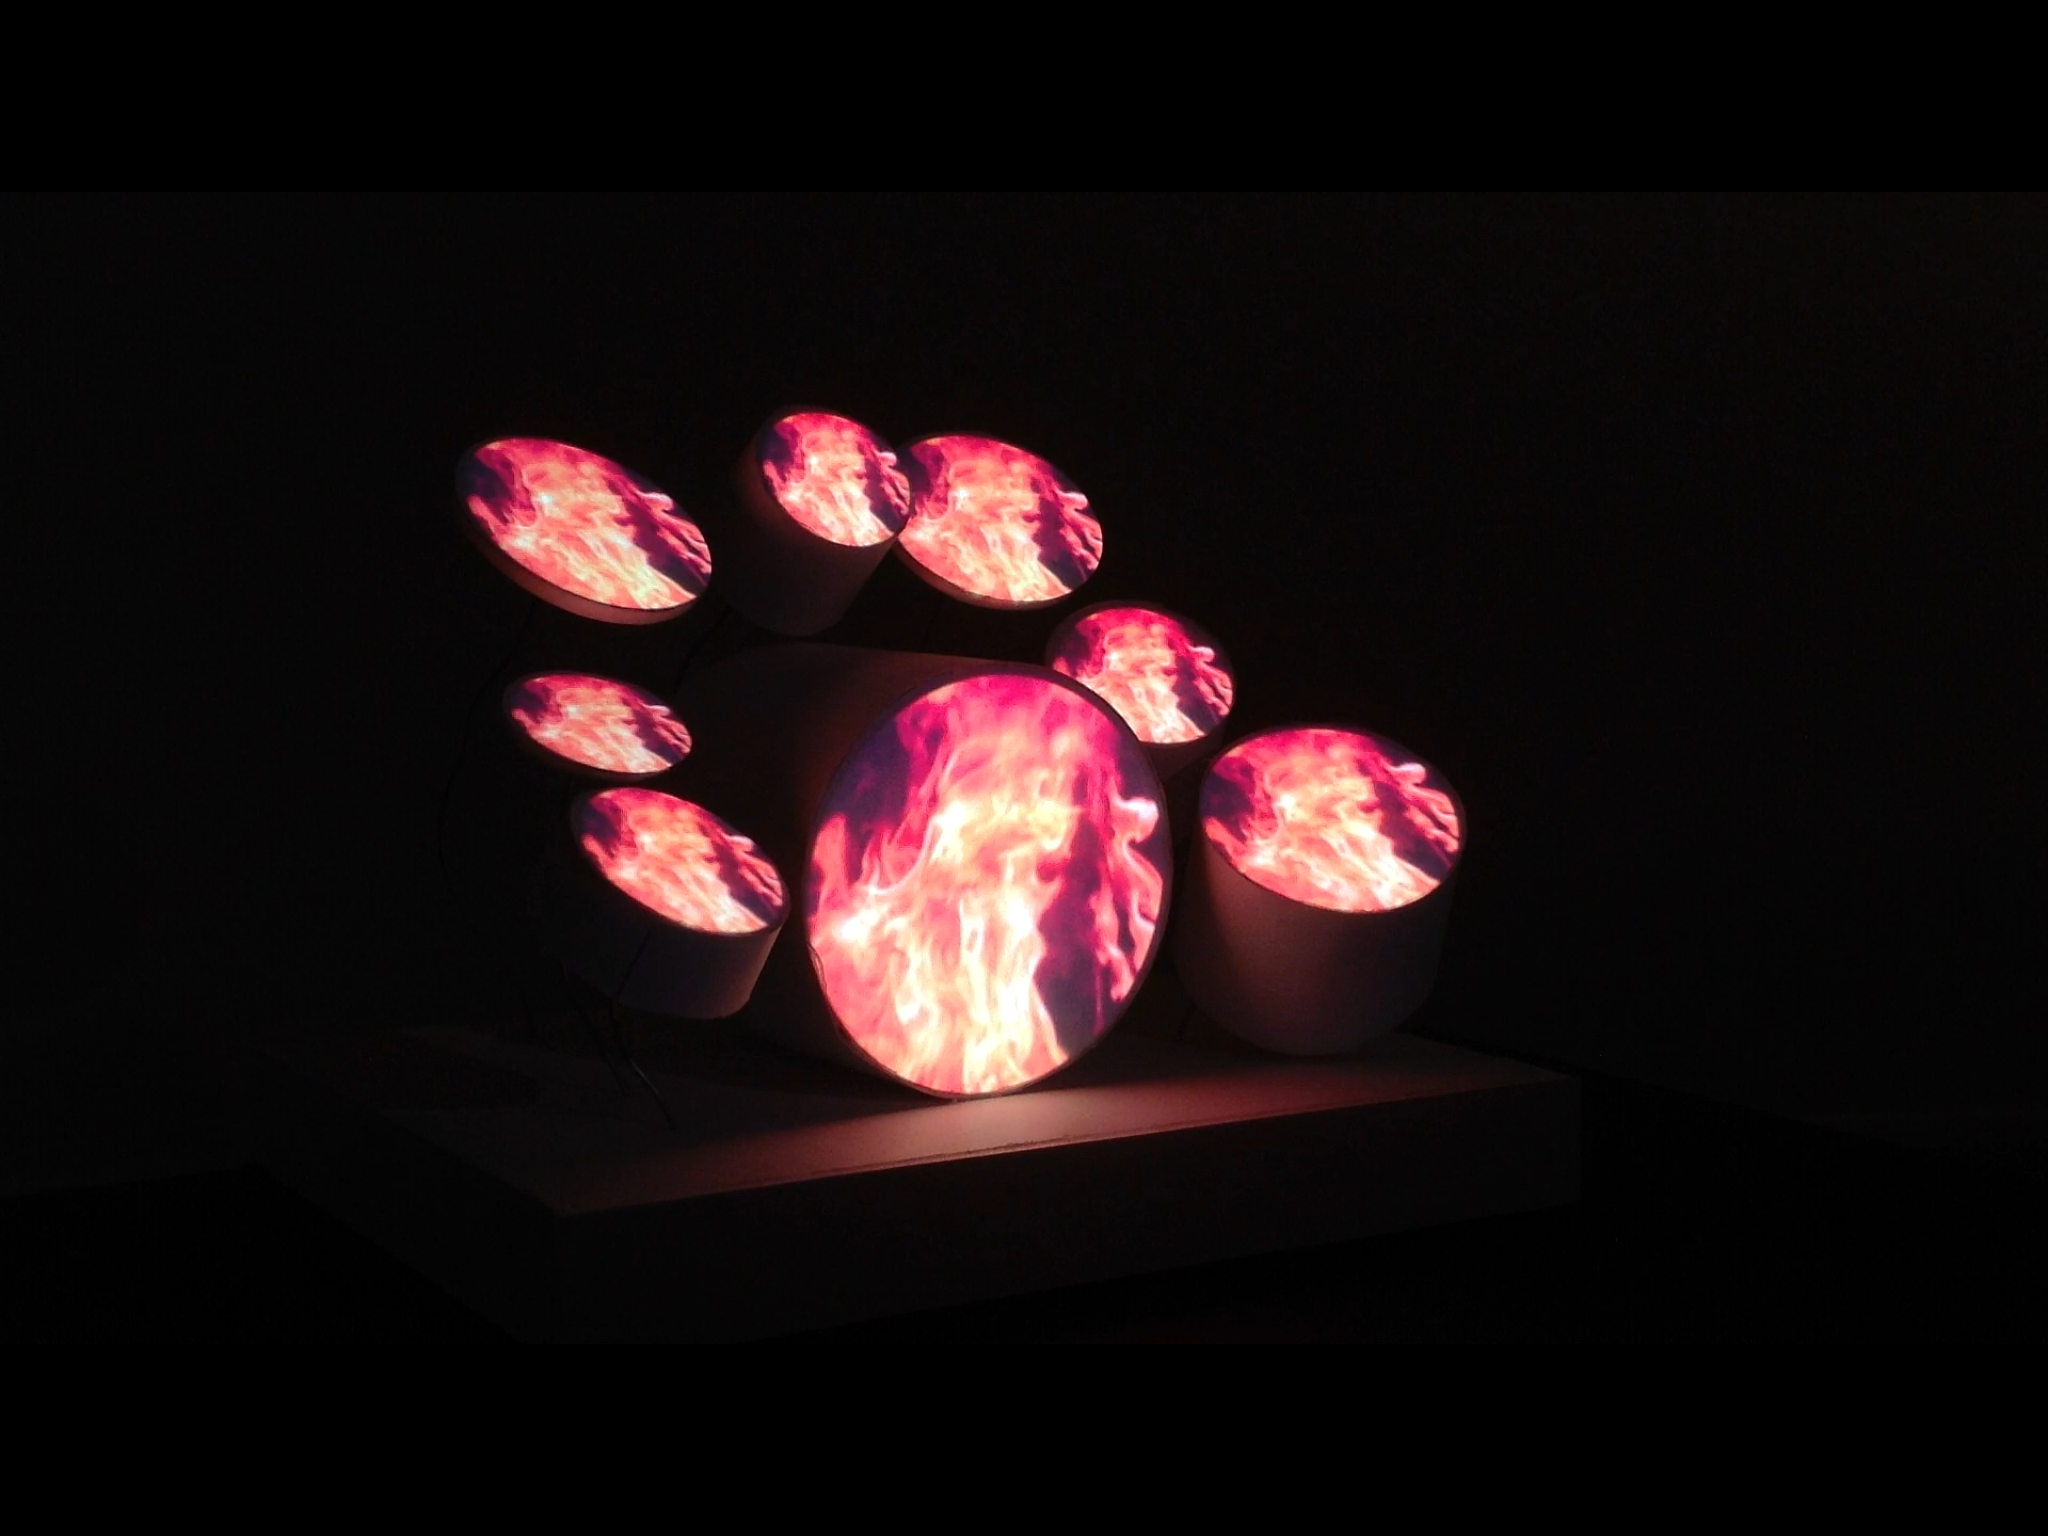 Miniature Projection Mapped Drums